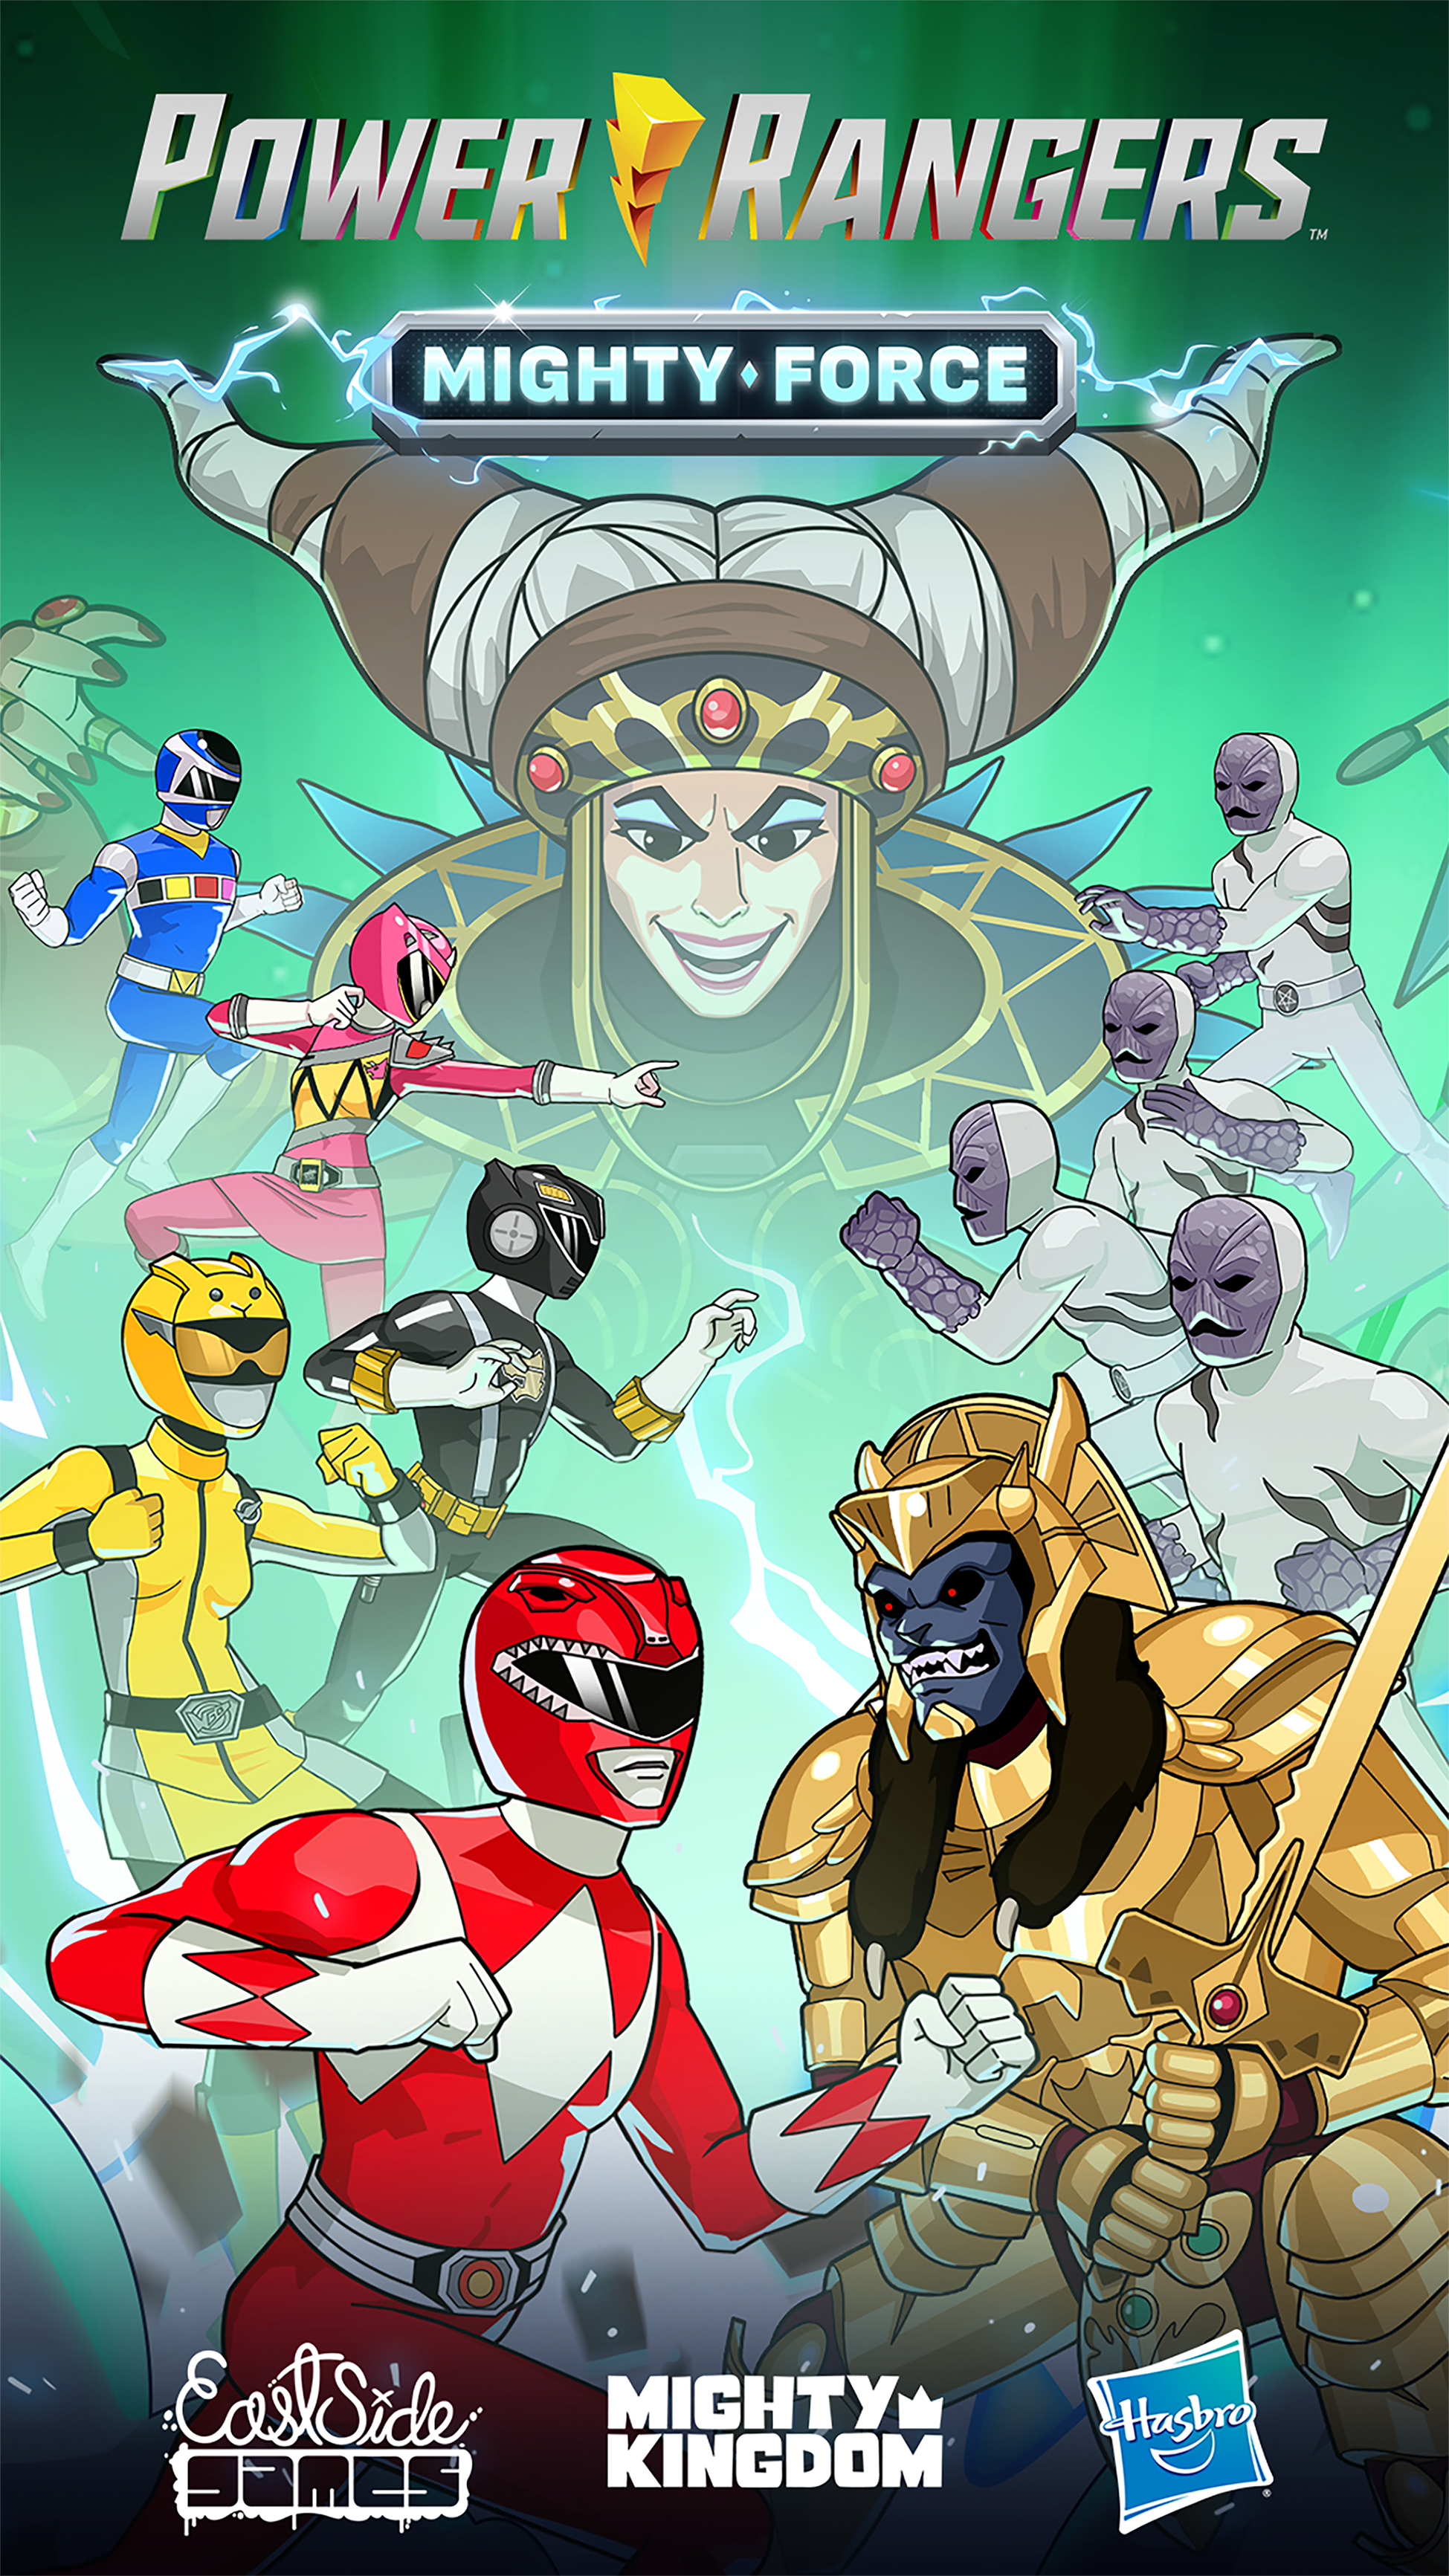 Screenshot 1 of Power Rangers Mighty Force 0.3.5